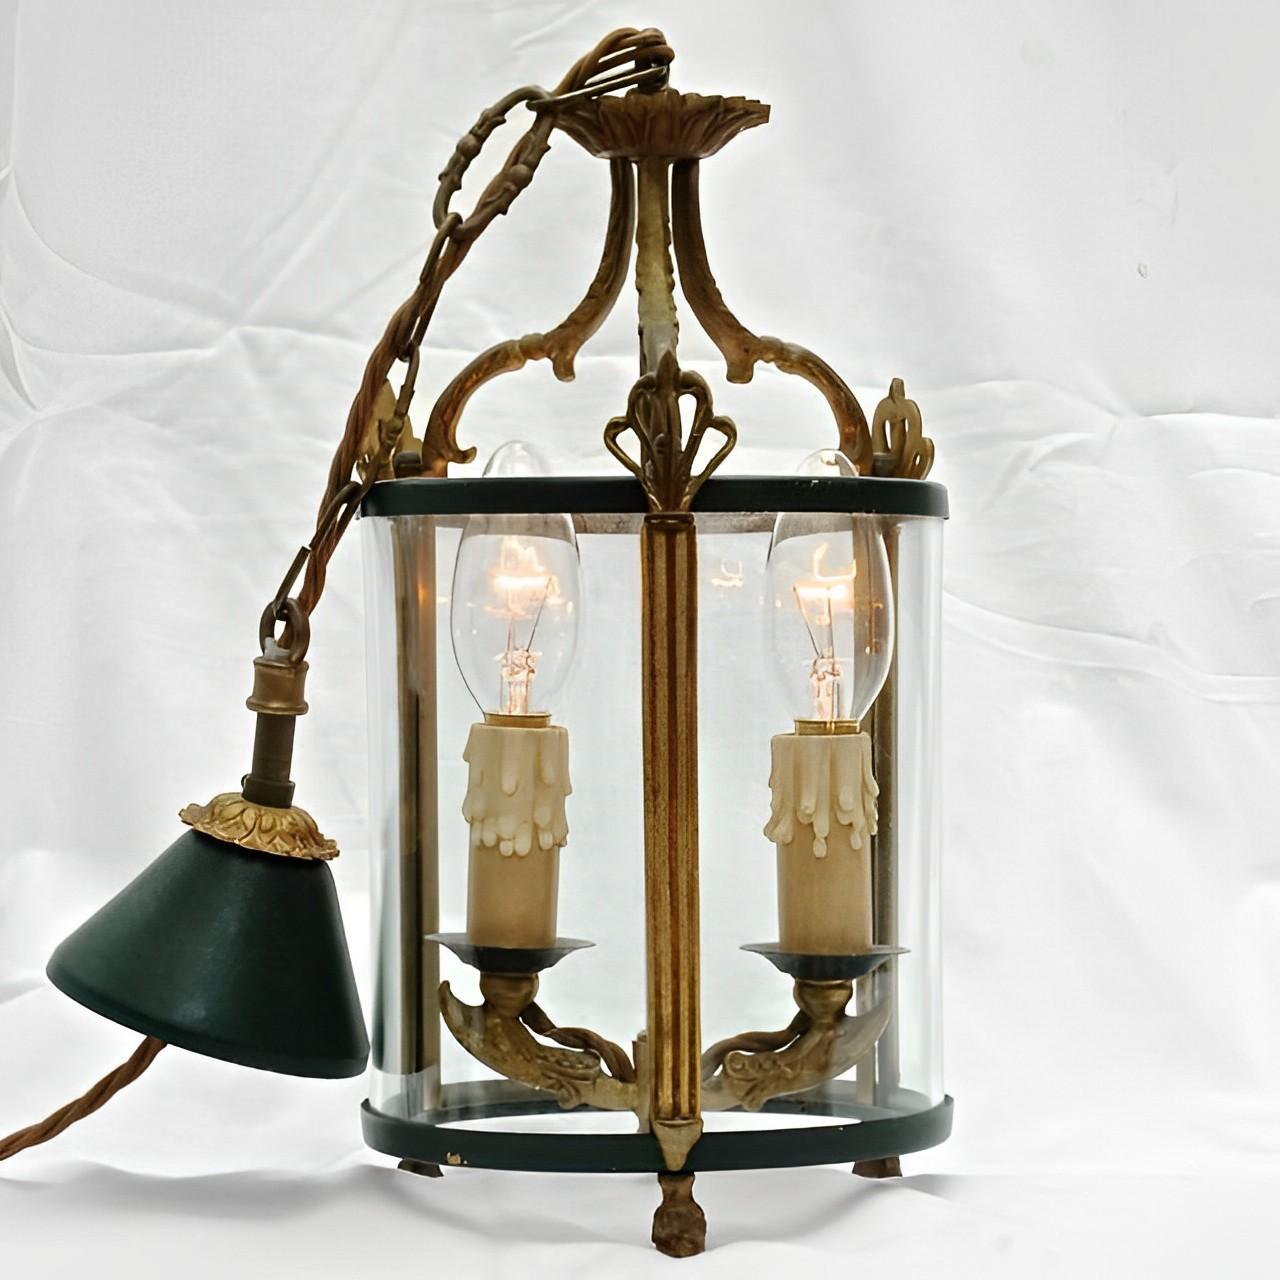 Round glazed two light French green painted lantern, with a decorative brass design. The glazed part of the lantern is height 18.8cm / 7.4 inches, and the lantern top is height 10cm / 4 inches. Diameter 14.8cm / 5.8 inches The lantern has been